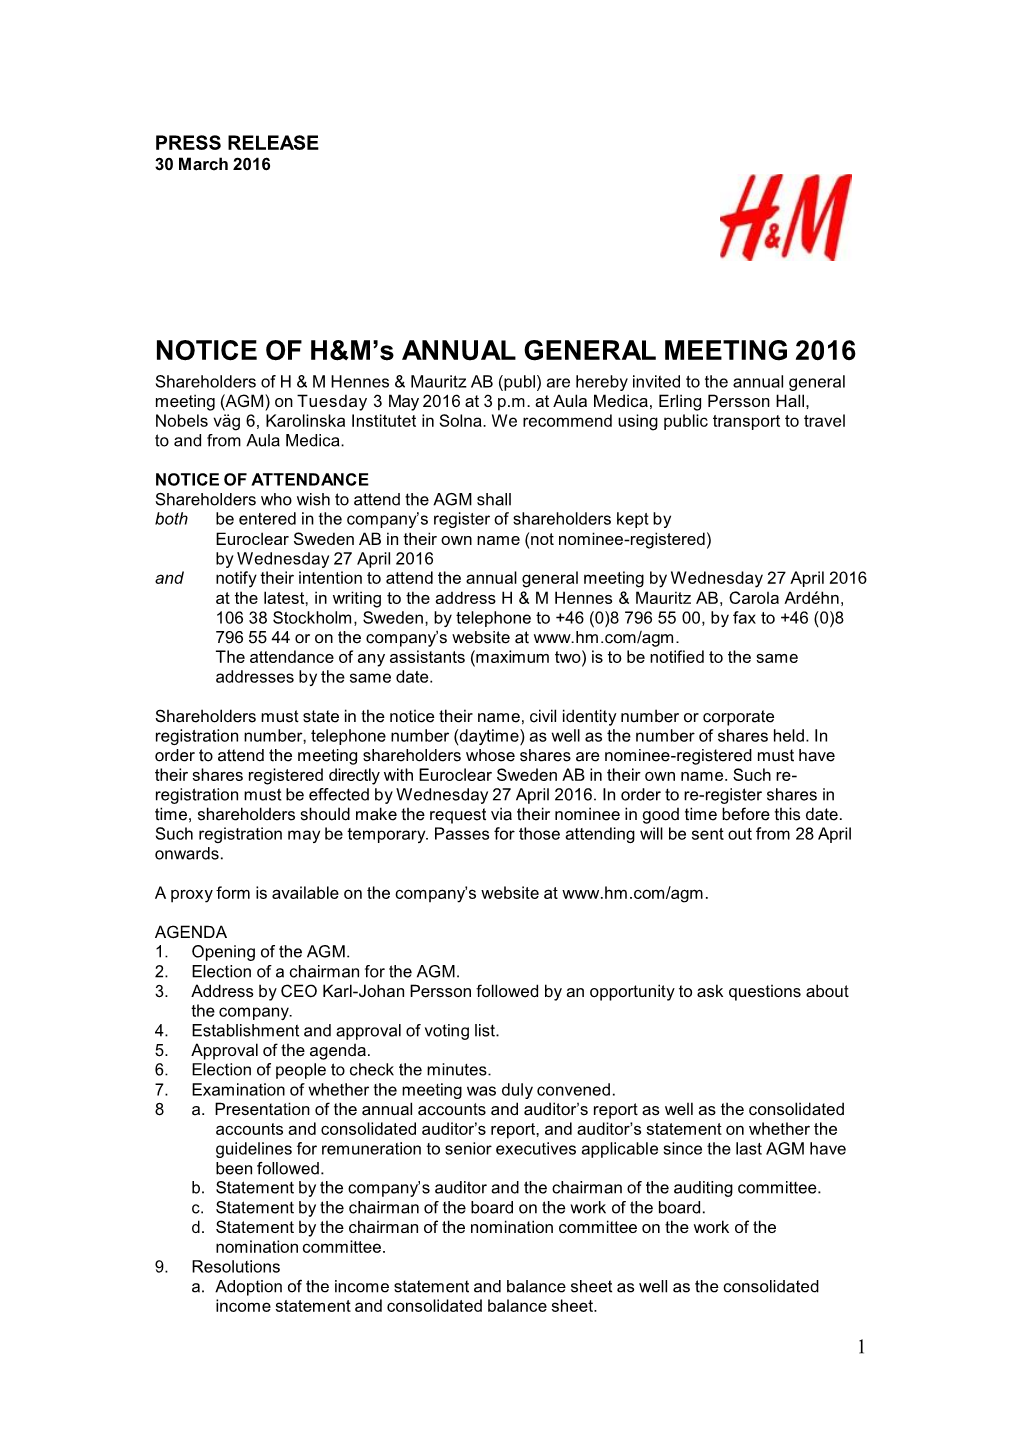 NOTICE of H&M's ANNUAL GENERAL MEETING 2016